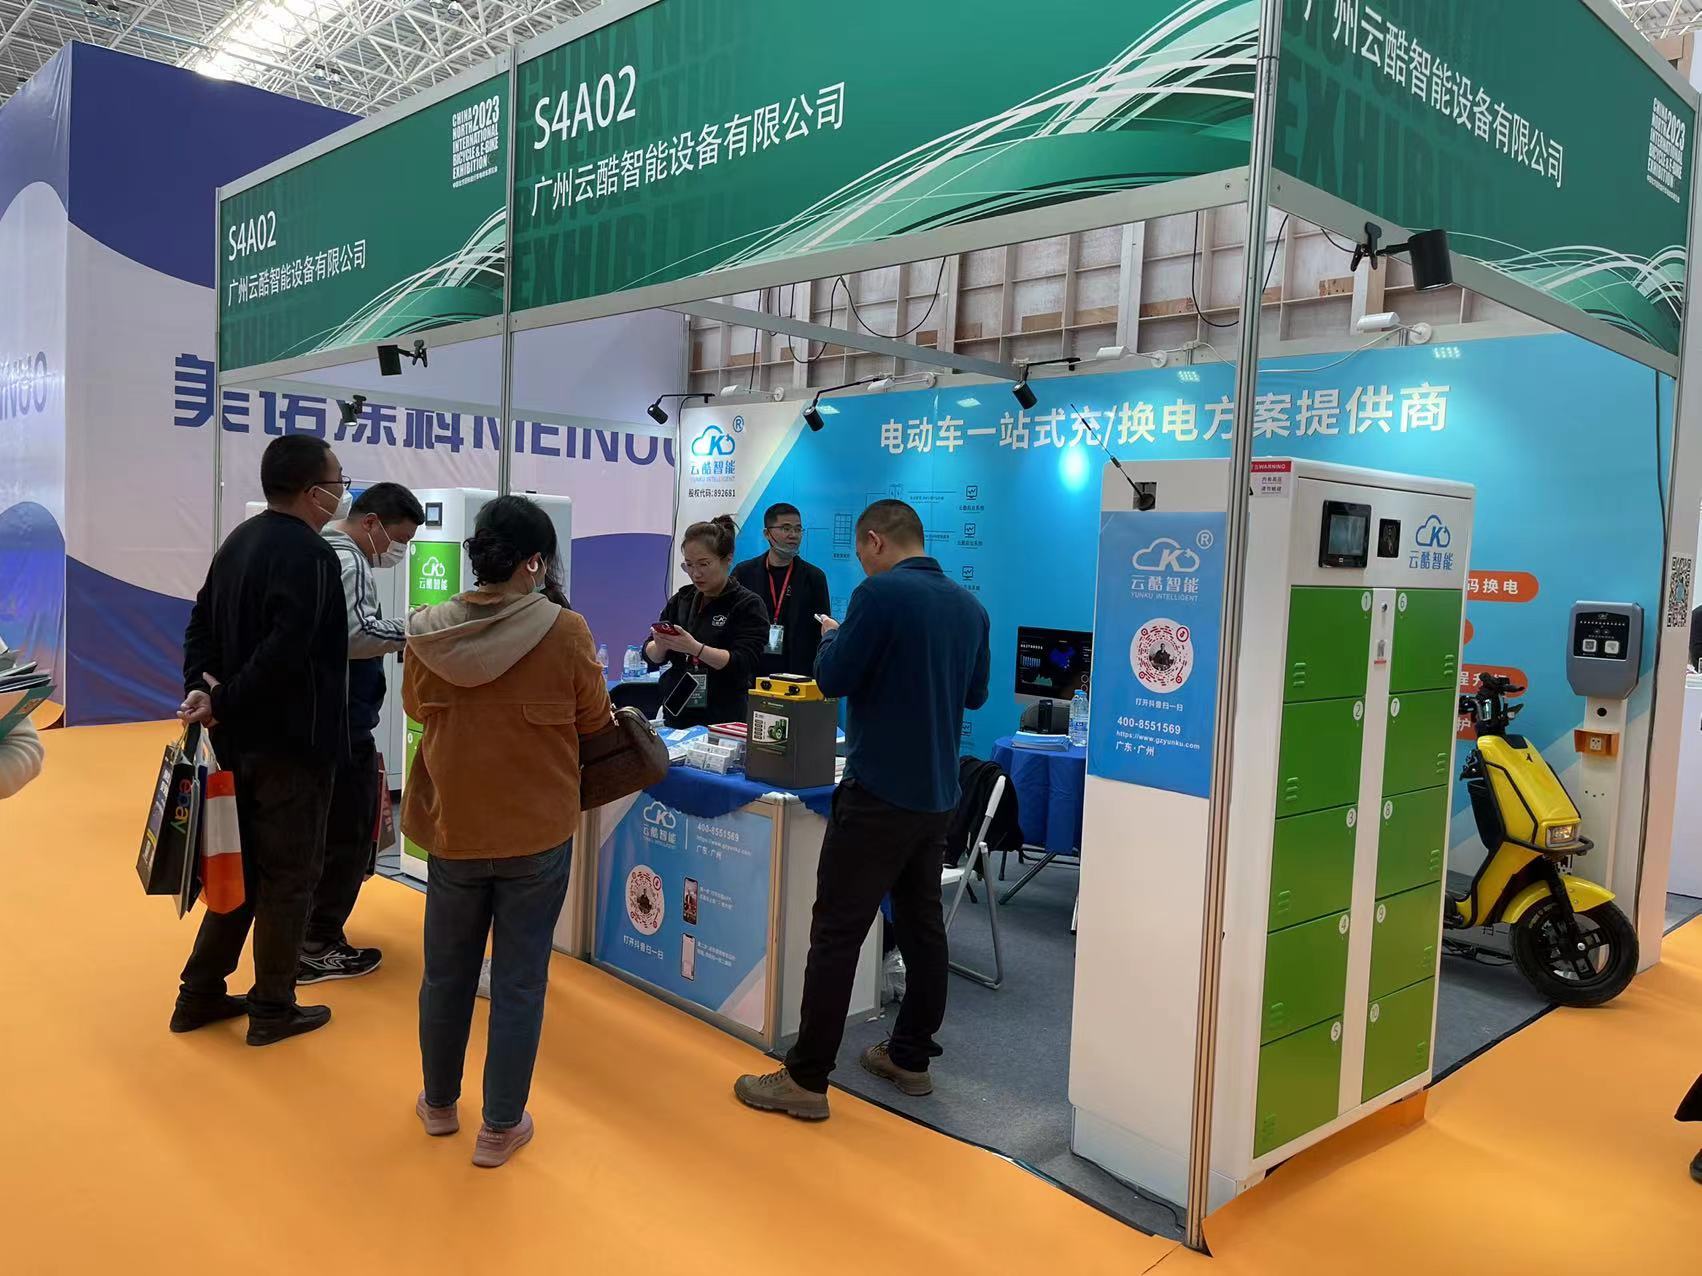 Yunku Intelligent appeared in the North International Bicycle and electric Vehicle Exhibition